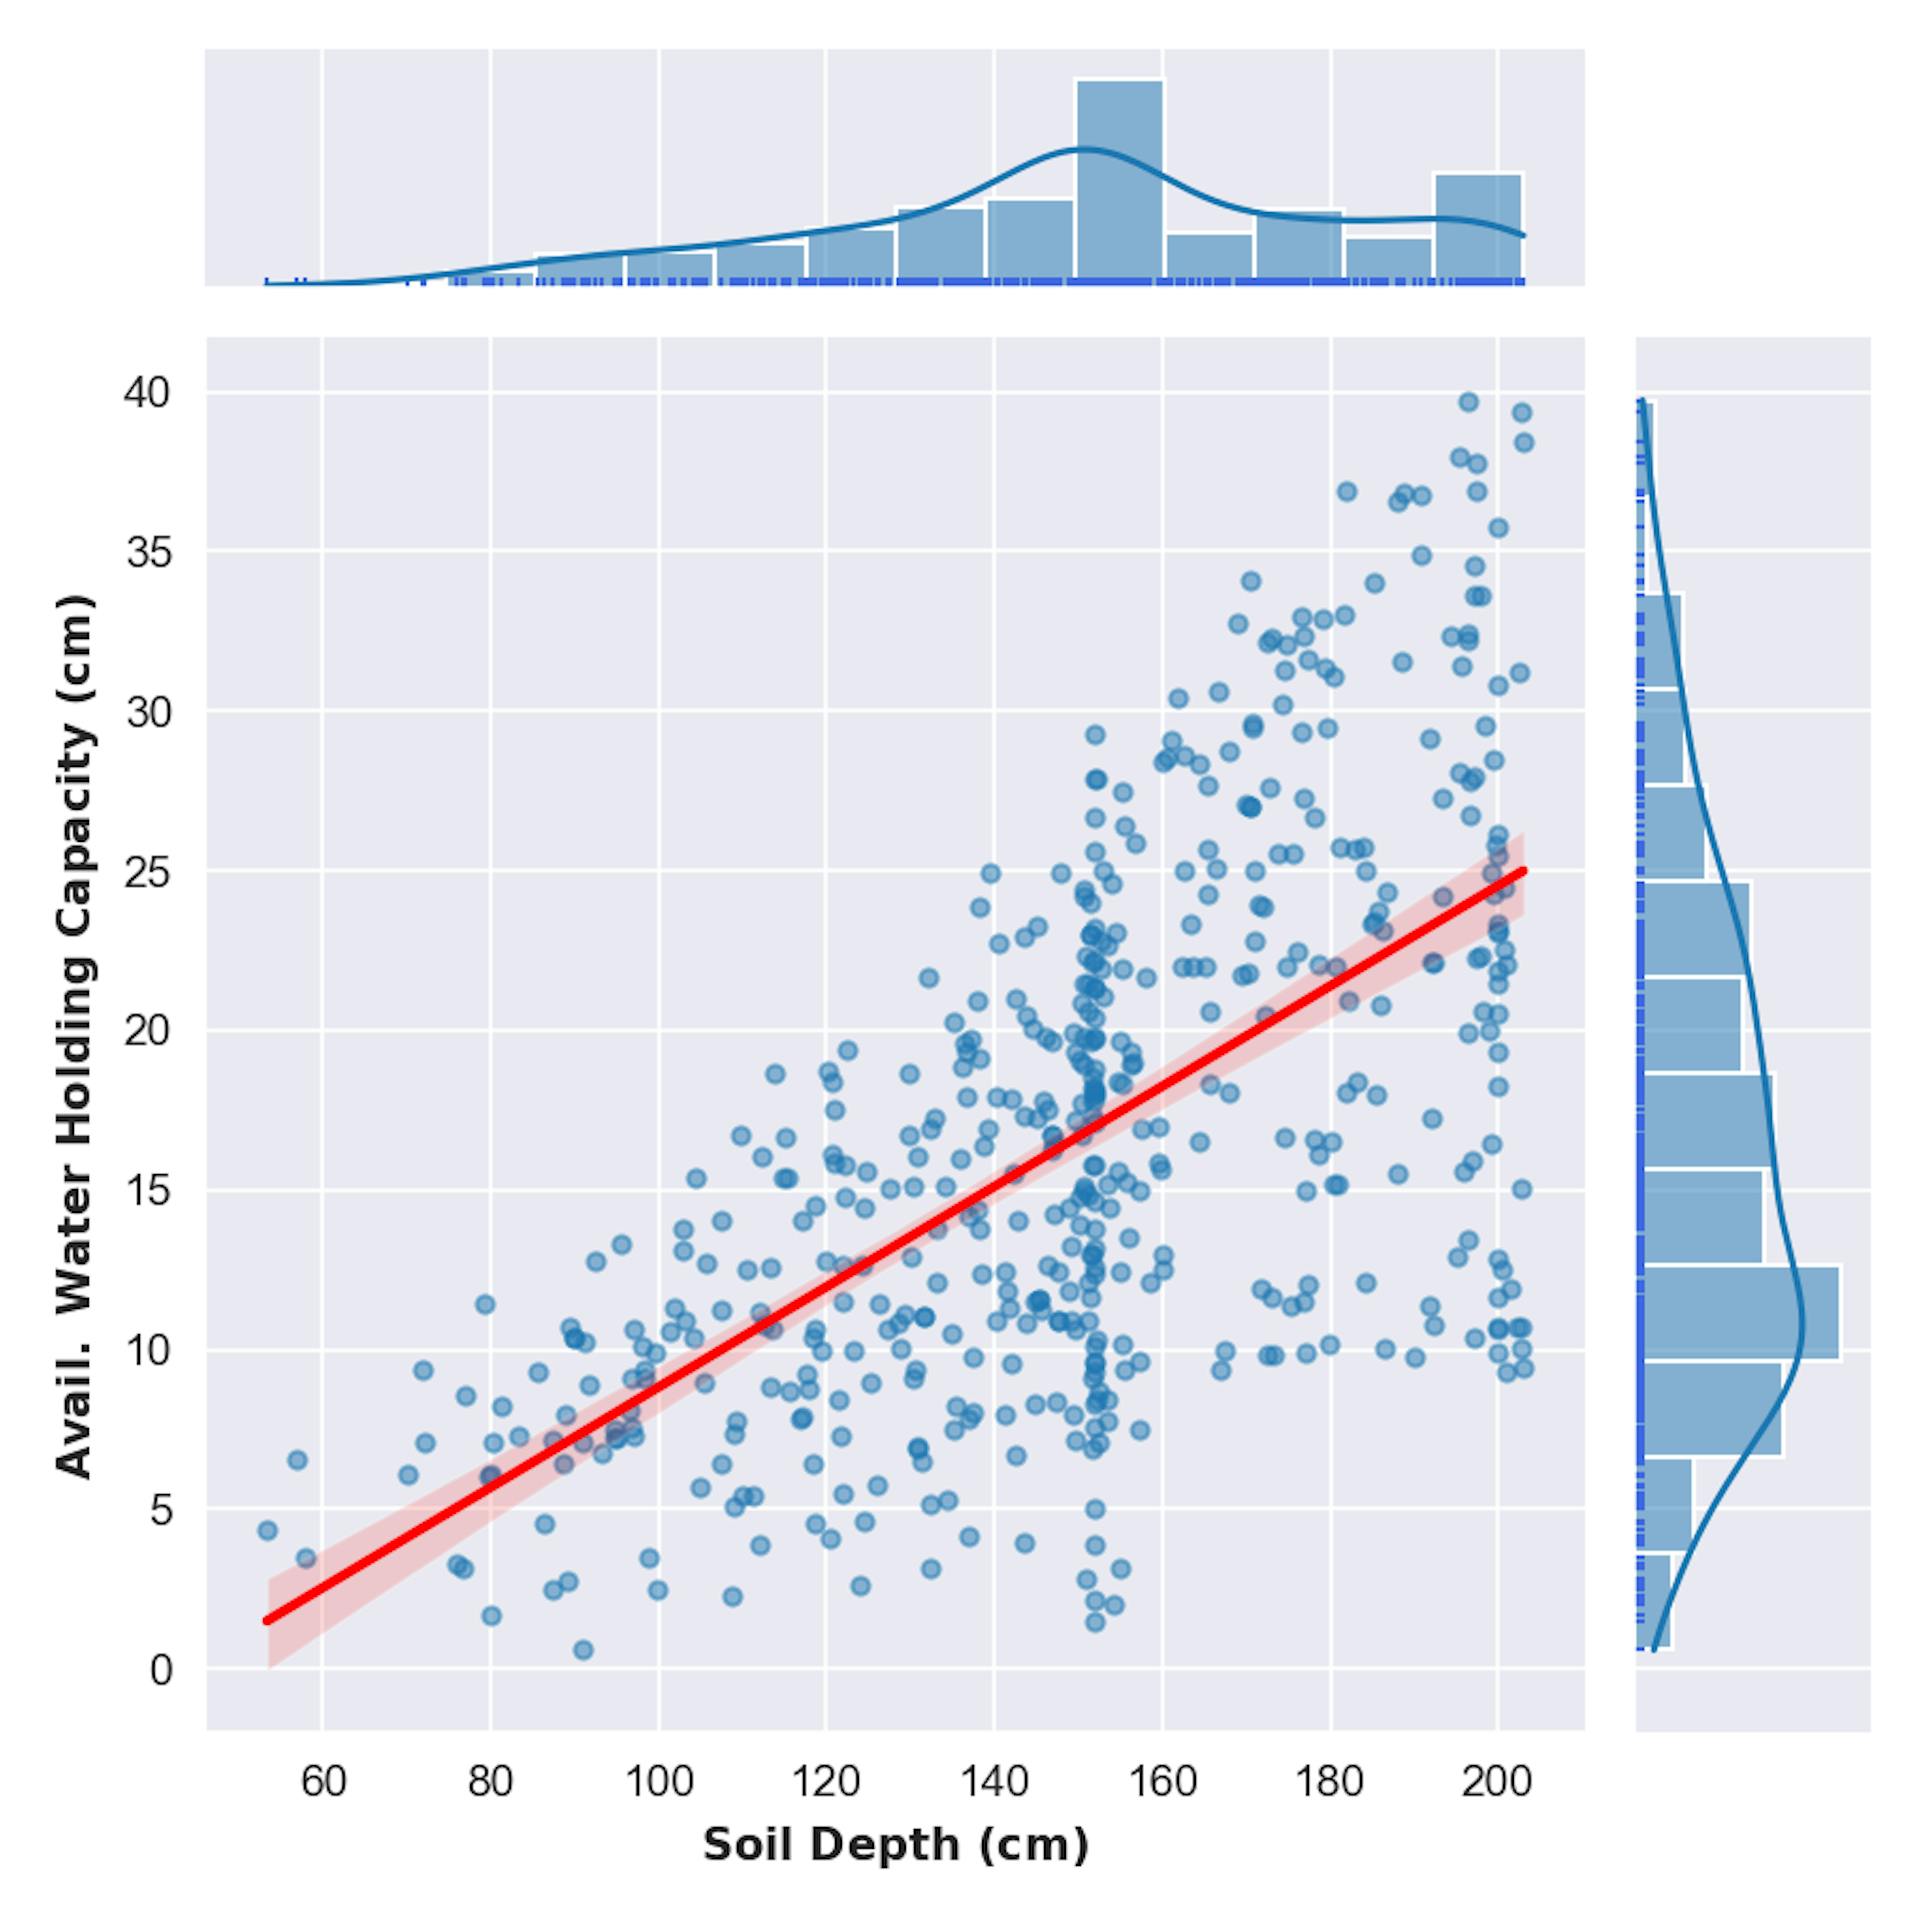 This tutorial makes no attempt to interpret the regression plot, nor does it assert accuracy of the results.